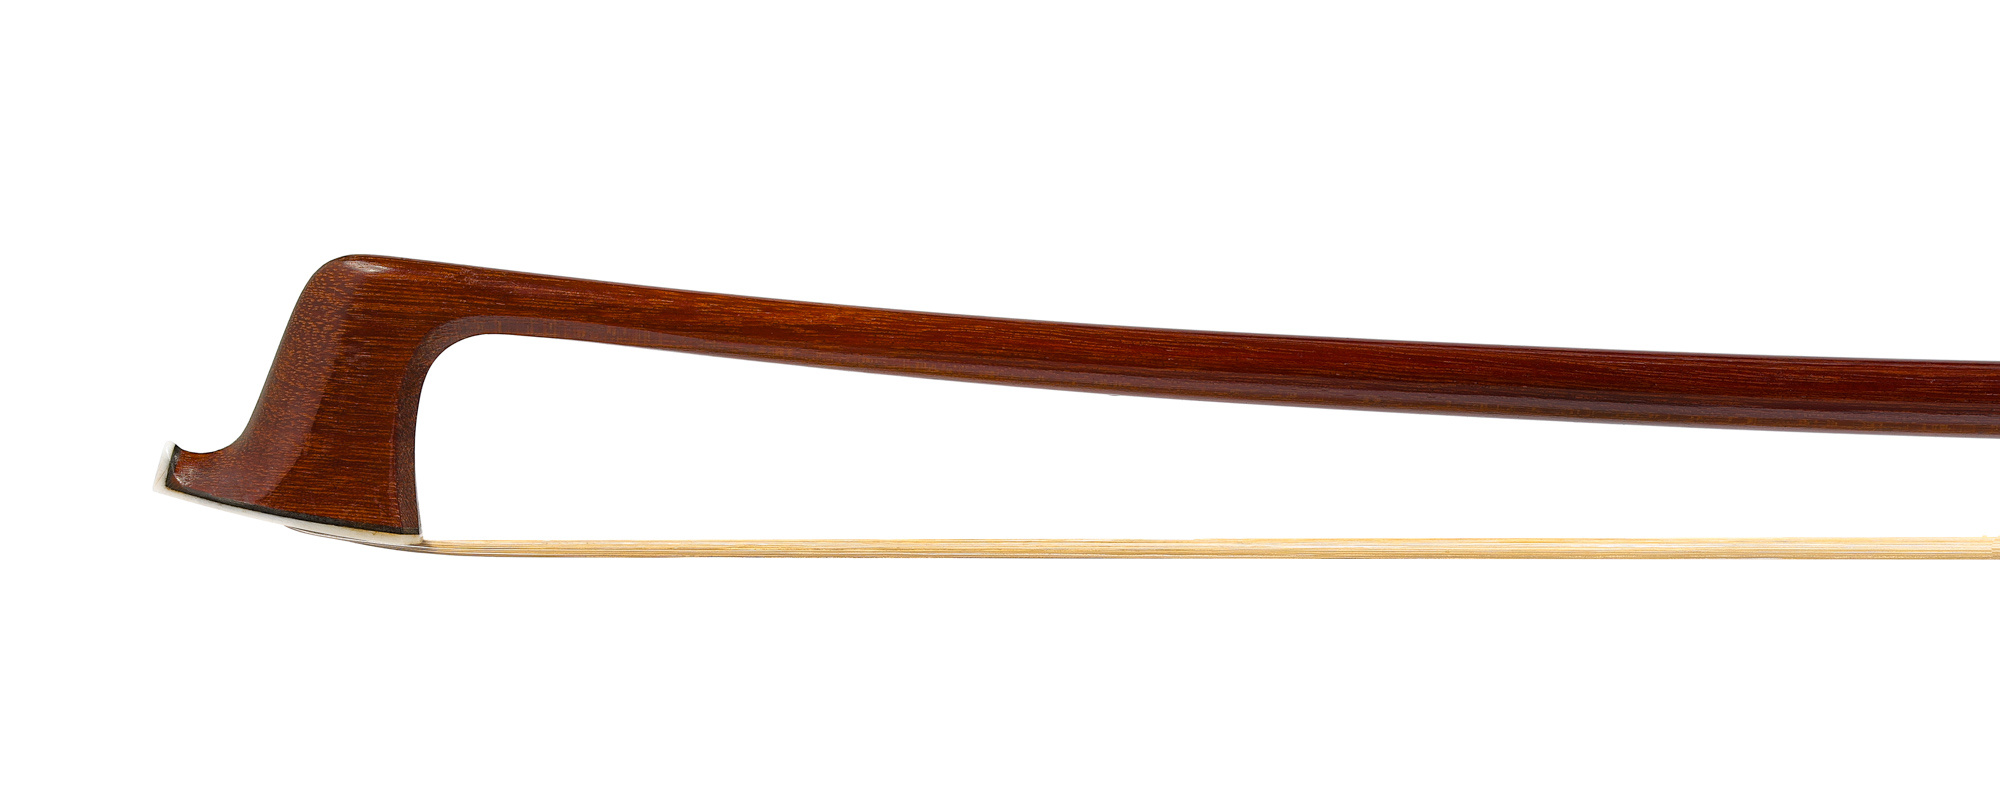 Brazilian JULIANO OLIVEIRA violin bow, round Pernambuco stick, silver-mounted ebony frog with mother-of-pearl fleur-de-lys inlay, BRAZIL, 62.4 grams